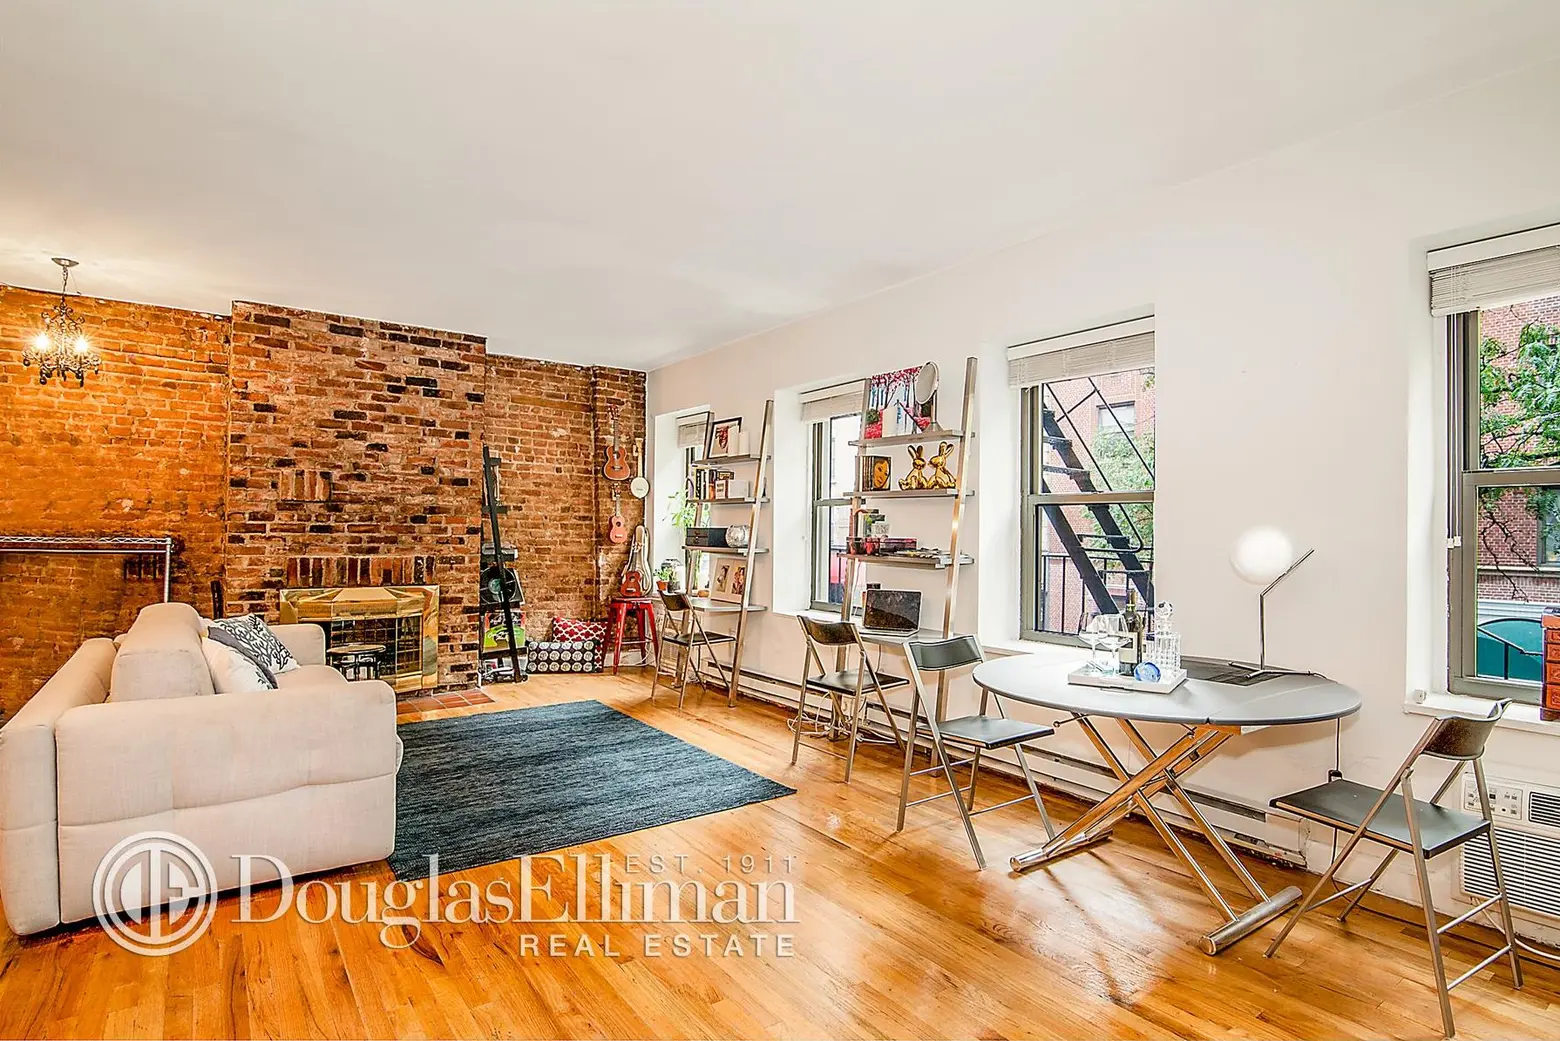 316-318 East 77th Street, Upper East Side, Lions Rock, Lion's Rock, Jones Wood, Historic Homes, multifamily, townhouse, cool listing